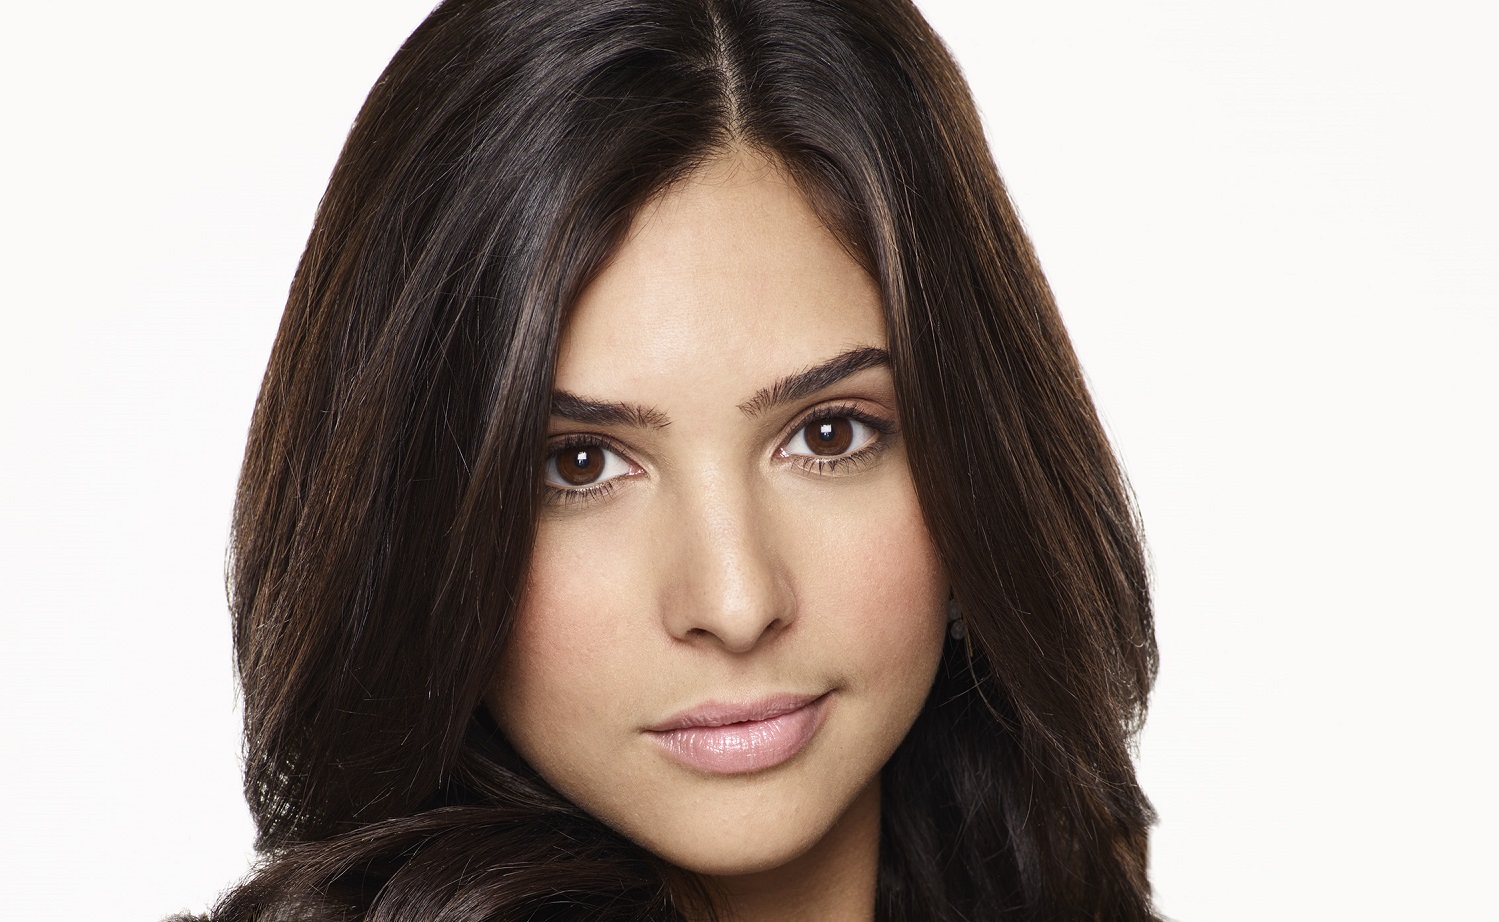 Days of Our Lives star Camila Banus as Gabi, in a headshot against a white background